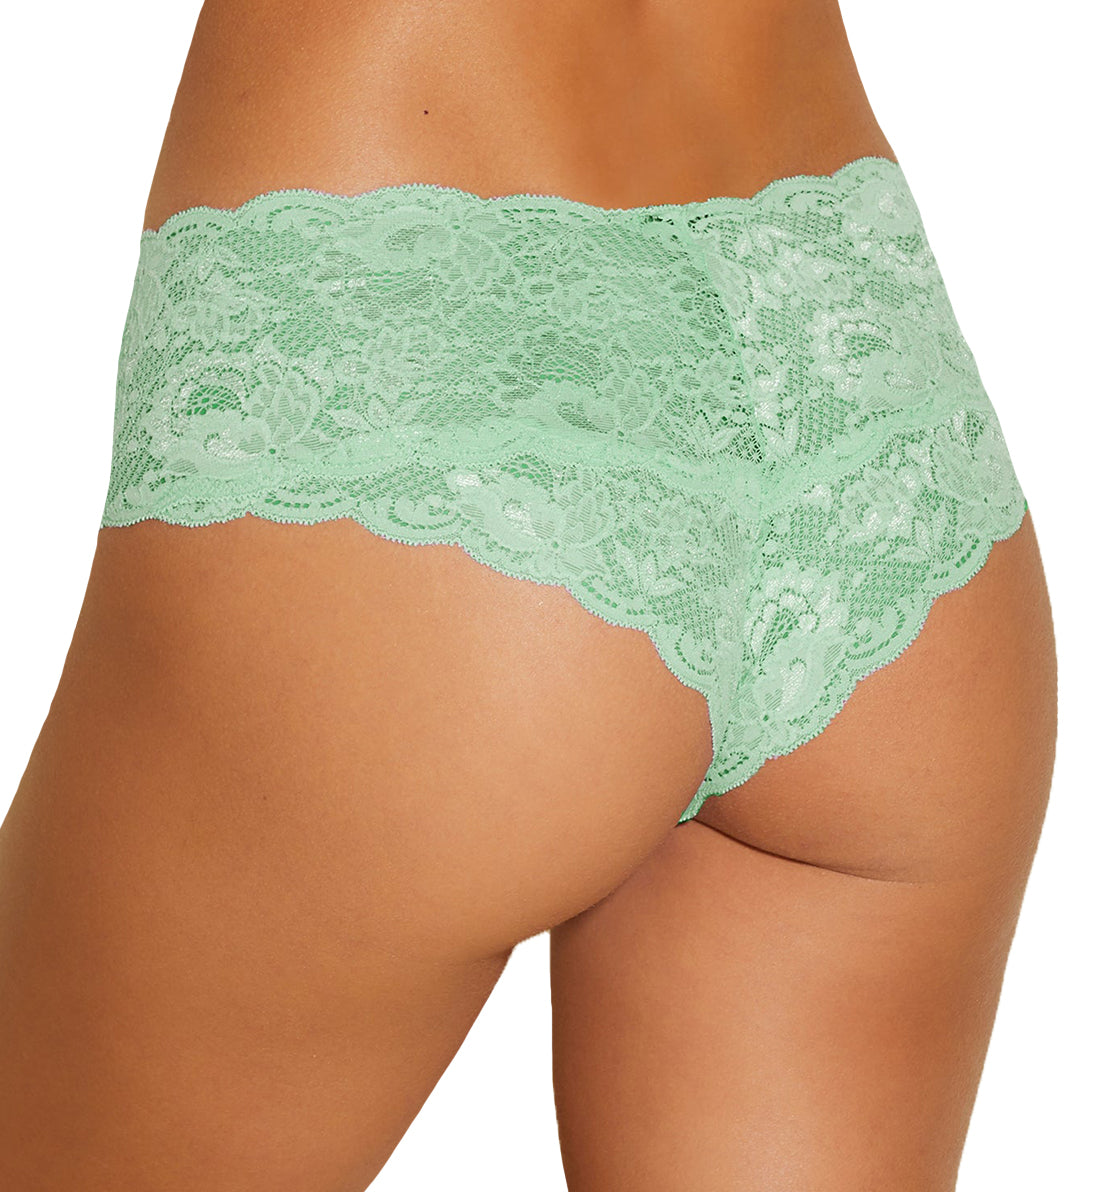 Cosabella Never Say Never Hottie Lowrider Hotpant (NEVER07ZL),S/M,Ghana Green - Ghana Green,S/M